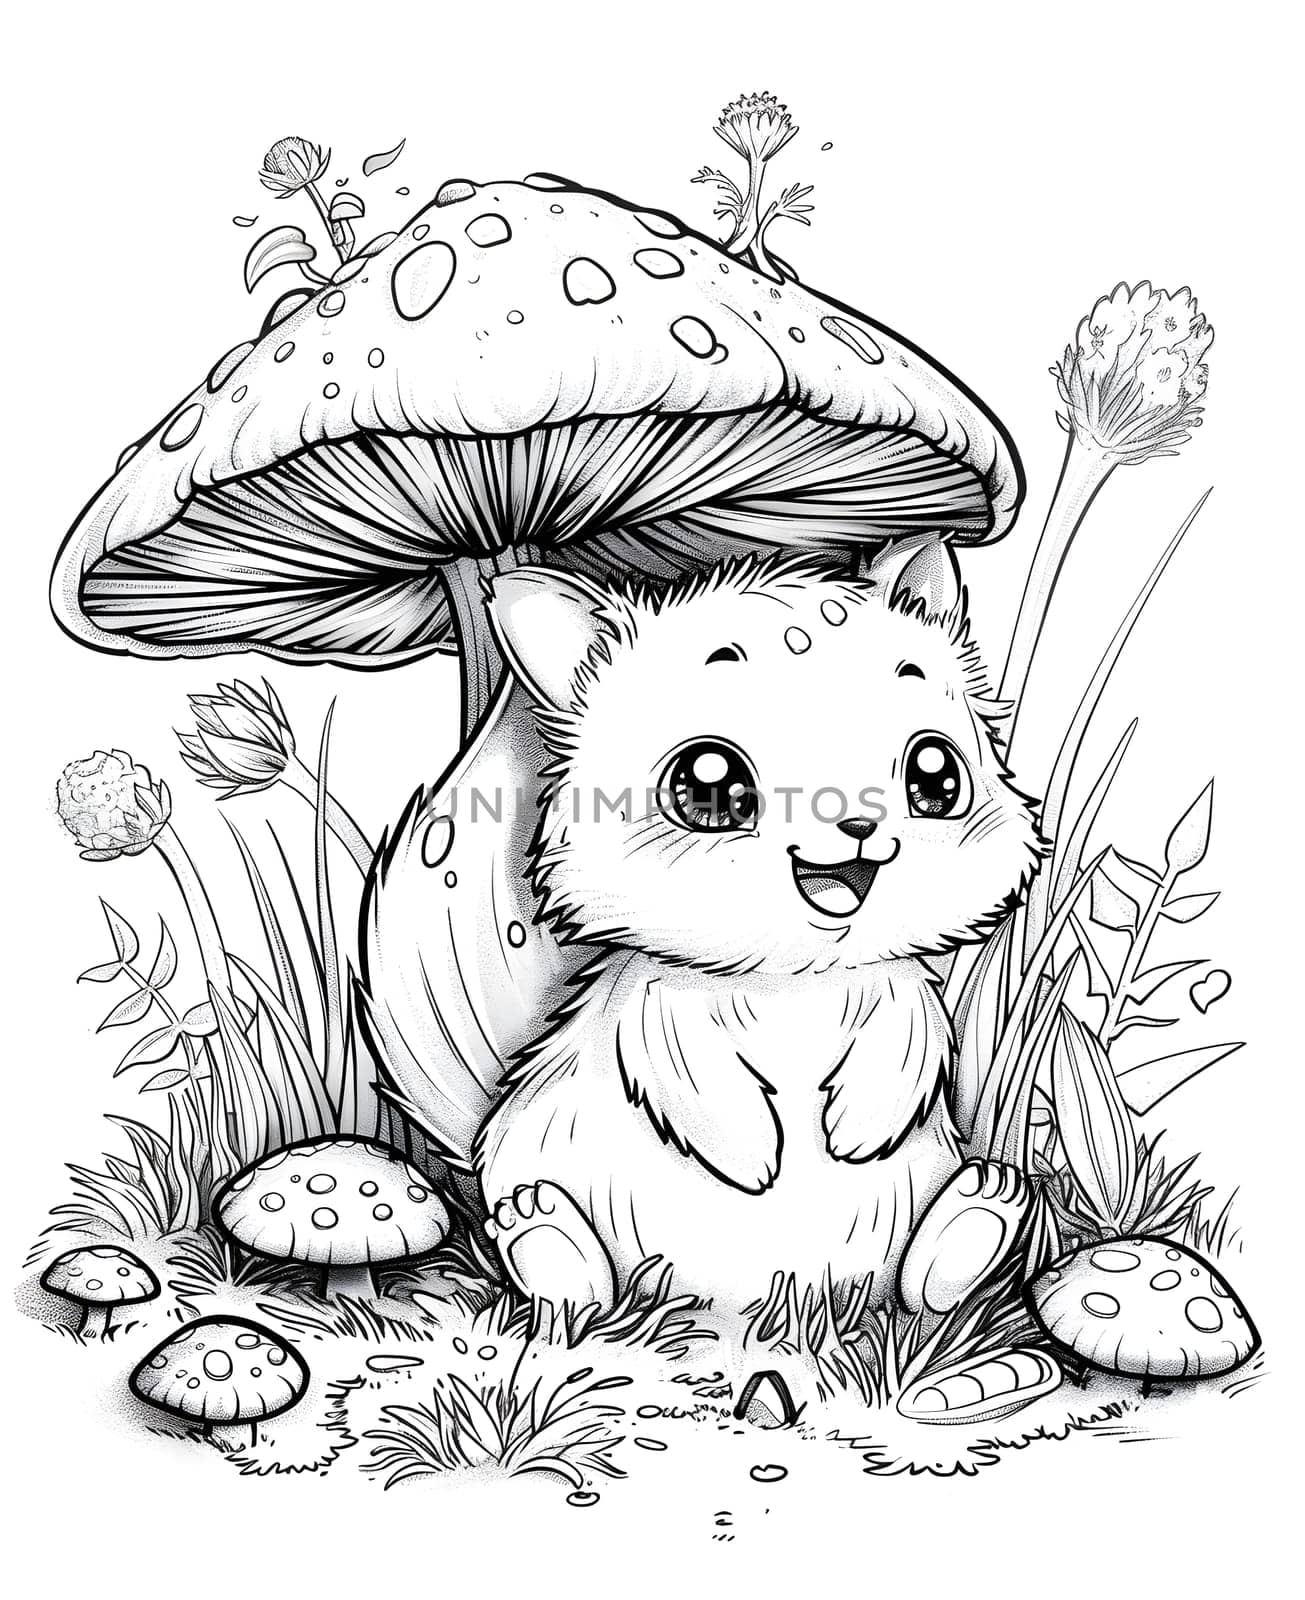 A cartoon cat sitting under a mushroom in a black and white drawing by Nadtochiy